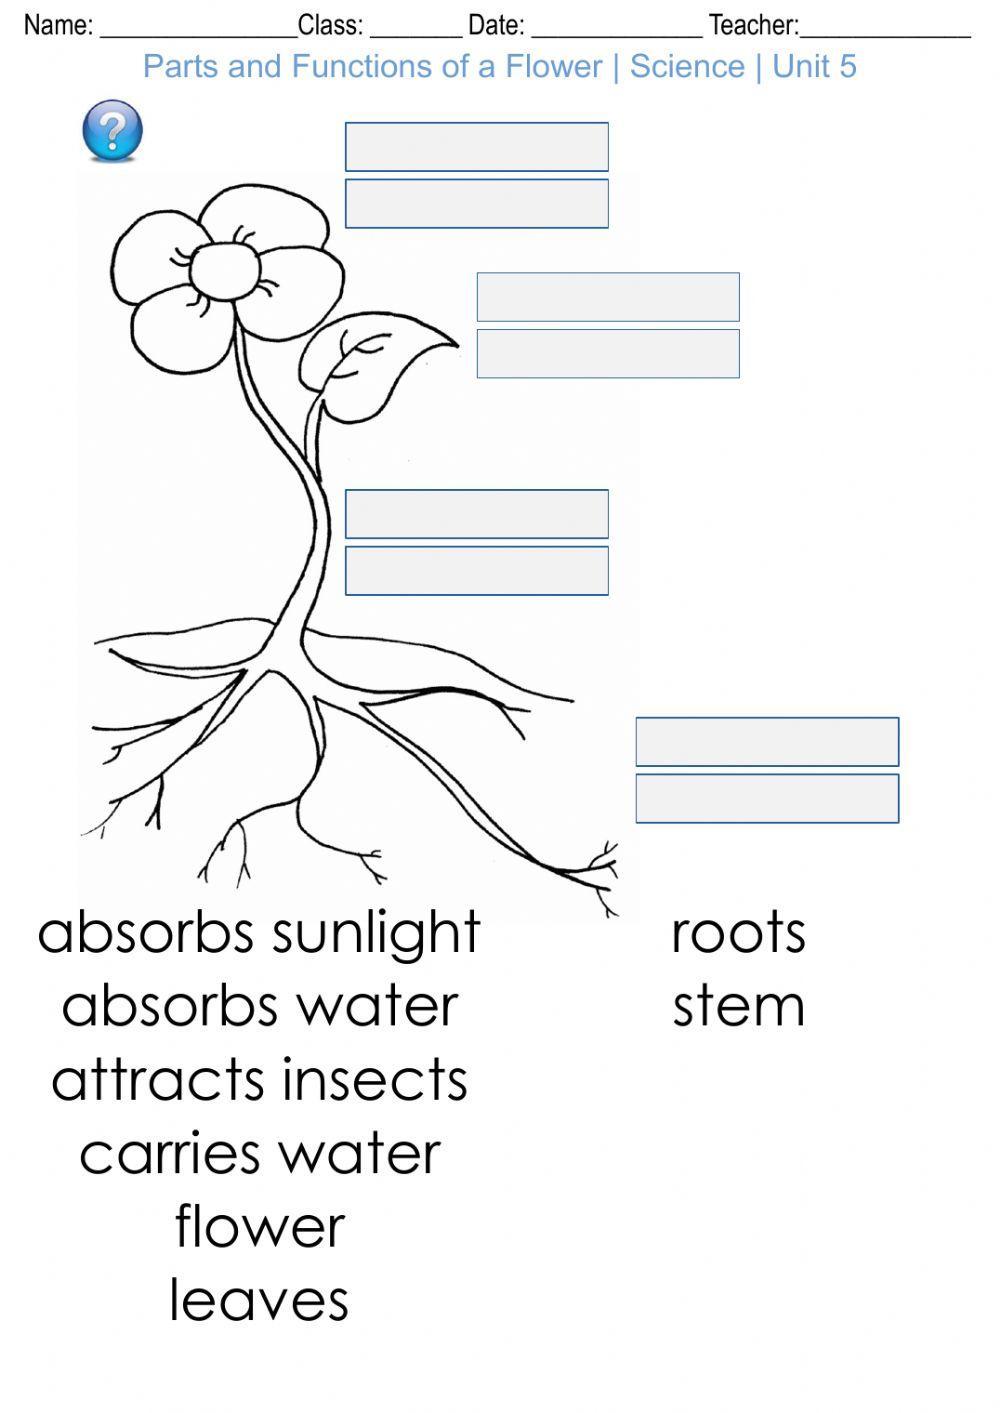 Parts and Functions of a Flower - Science - Unit 5